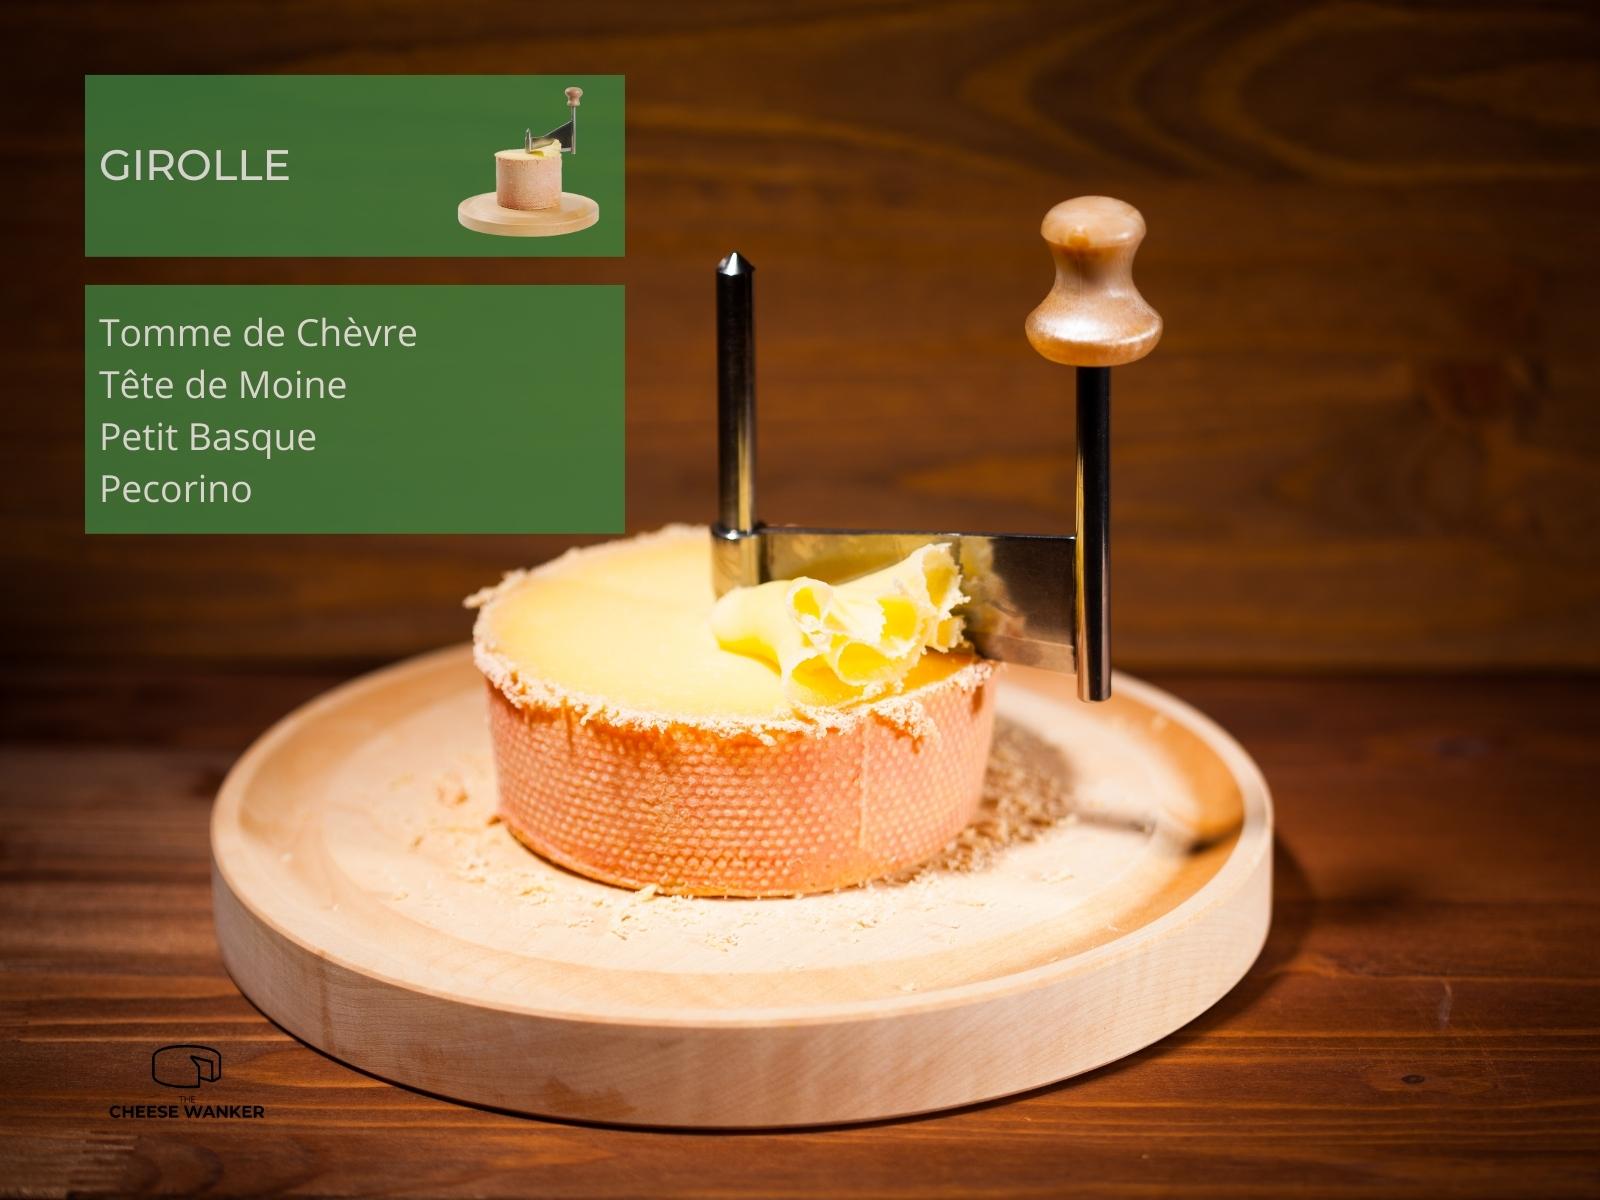 Tete de Moine cheese flowers on top of a Girolle